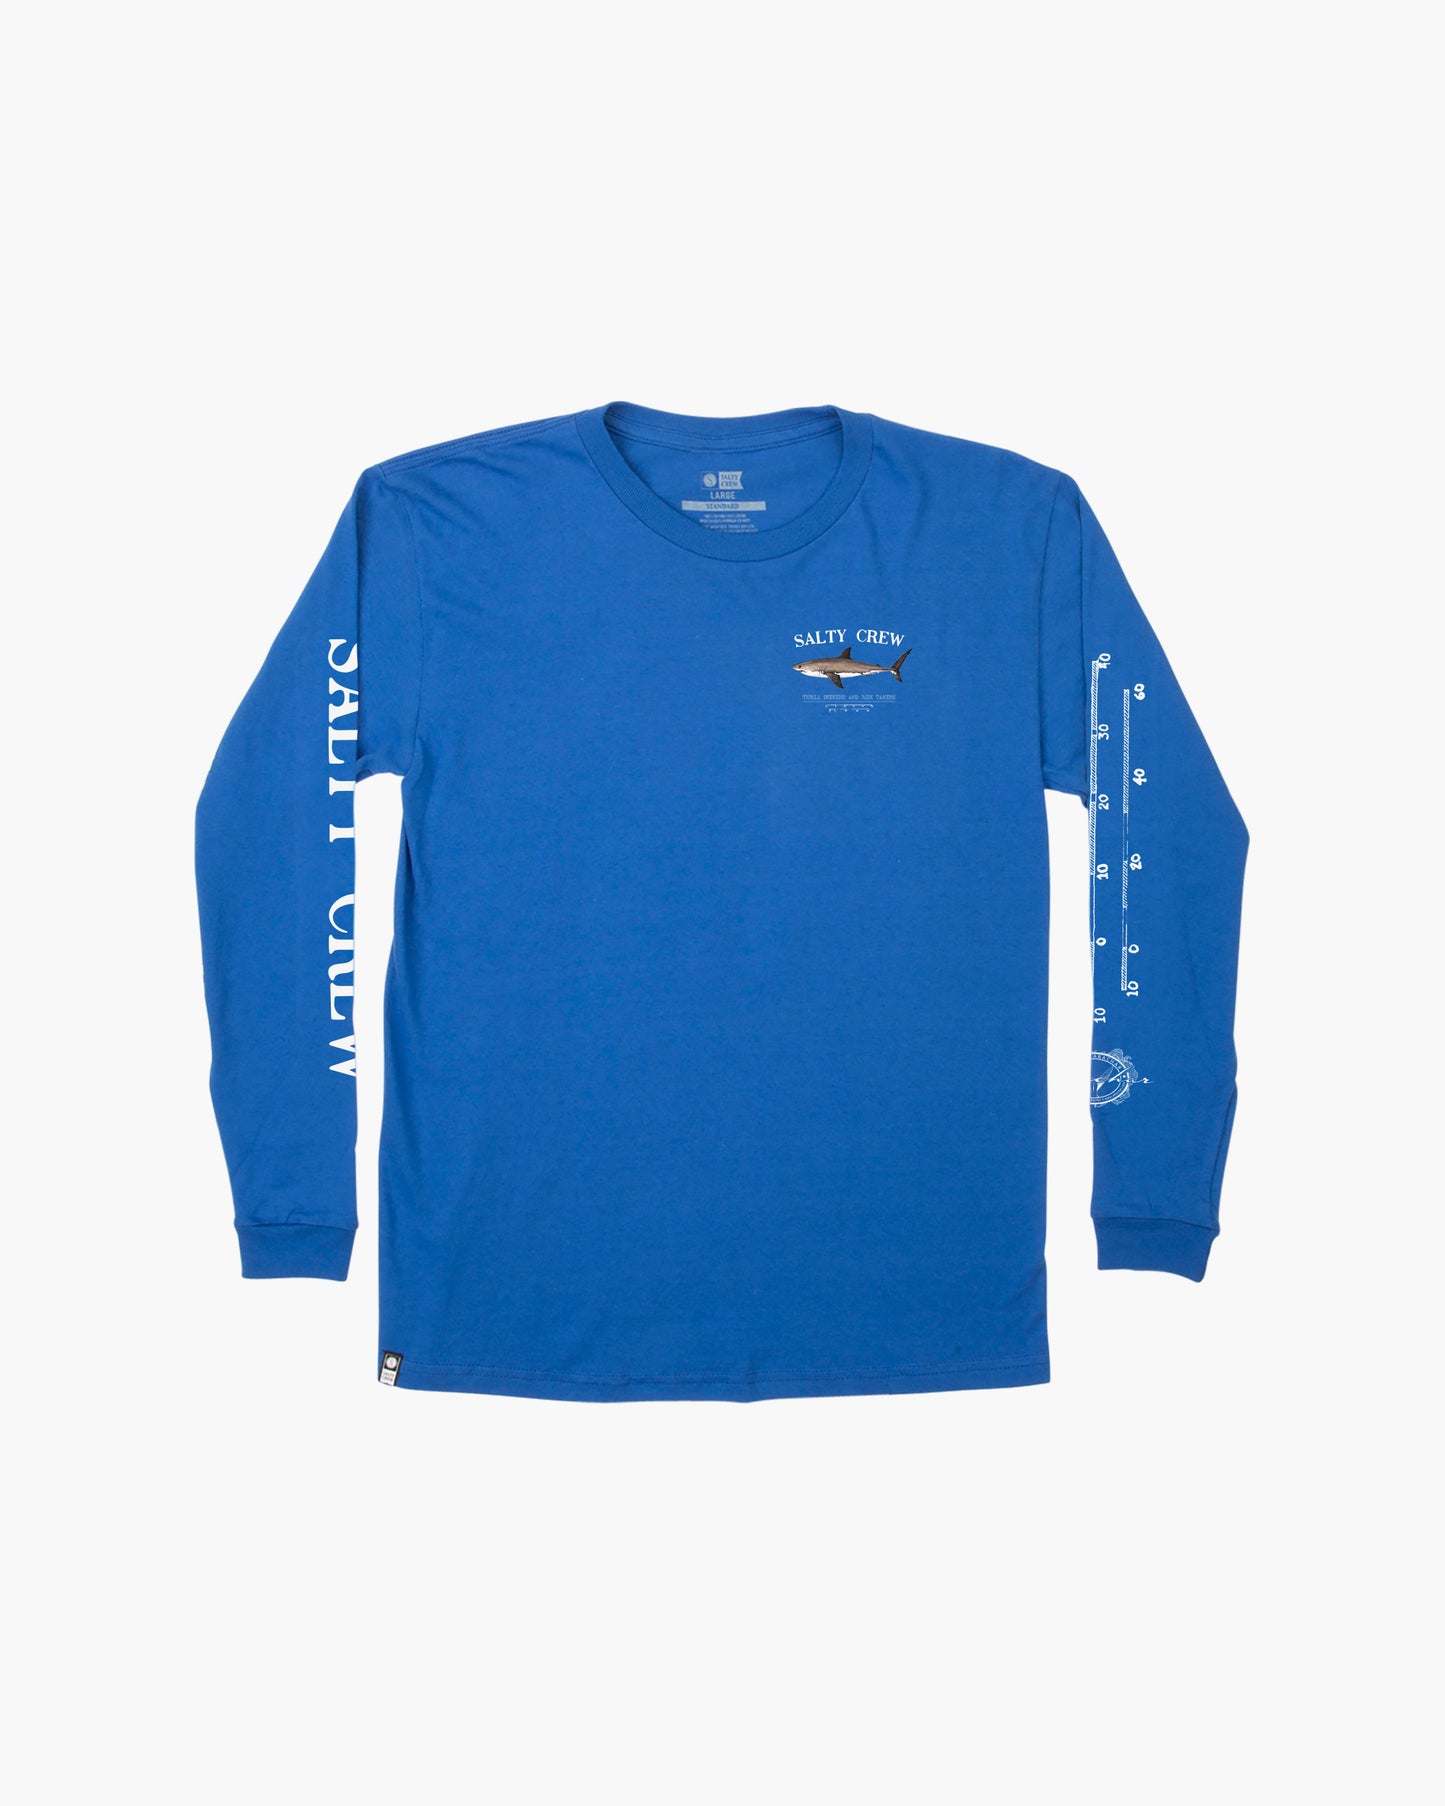 Salty Crew Bruce Boys Royal L/S Tee Front off Body